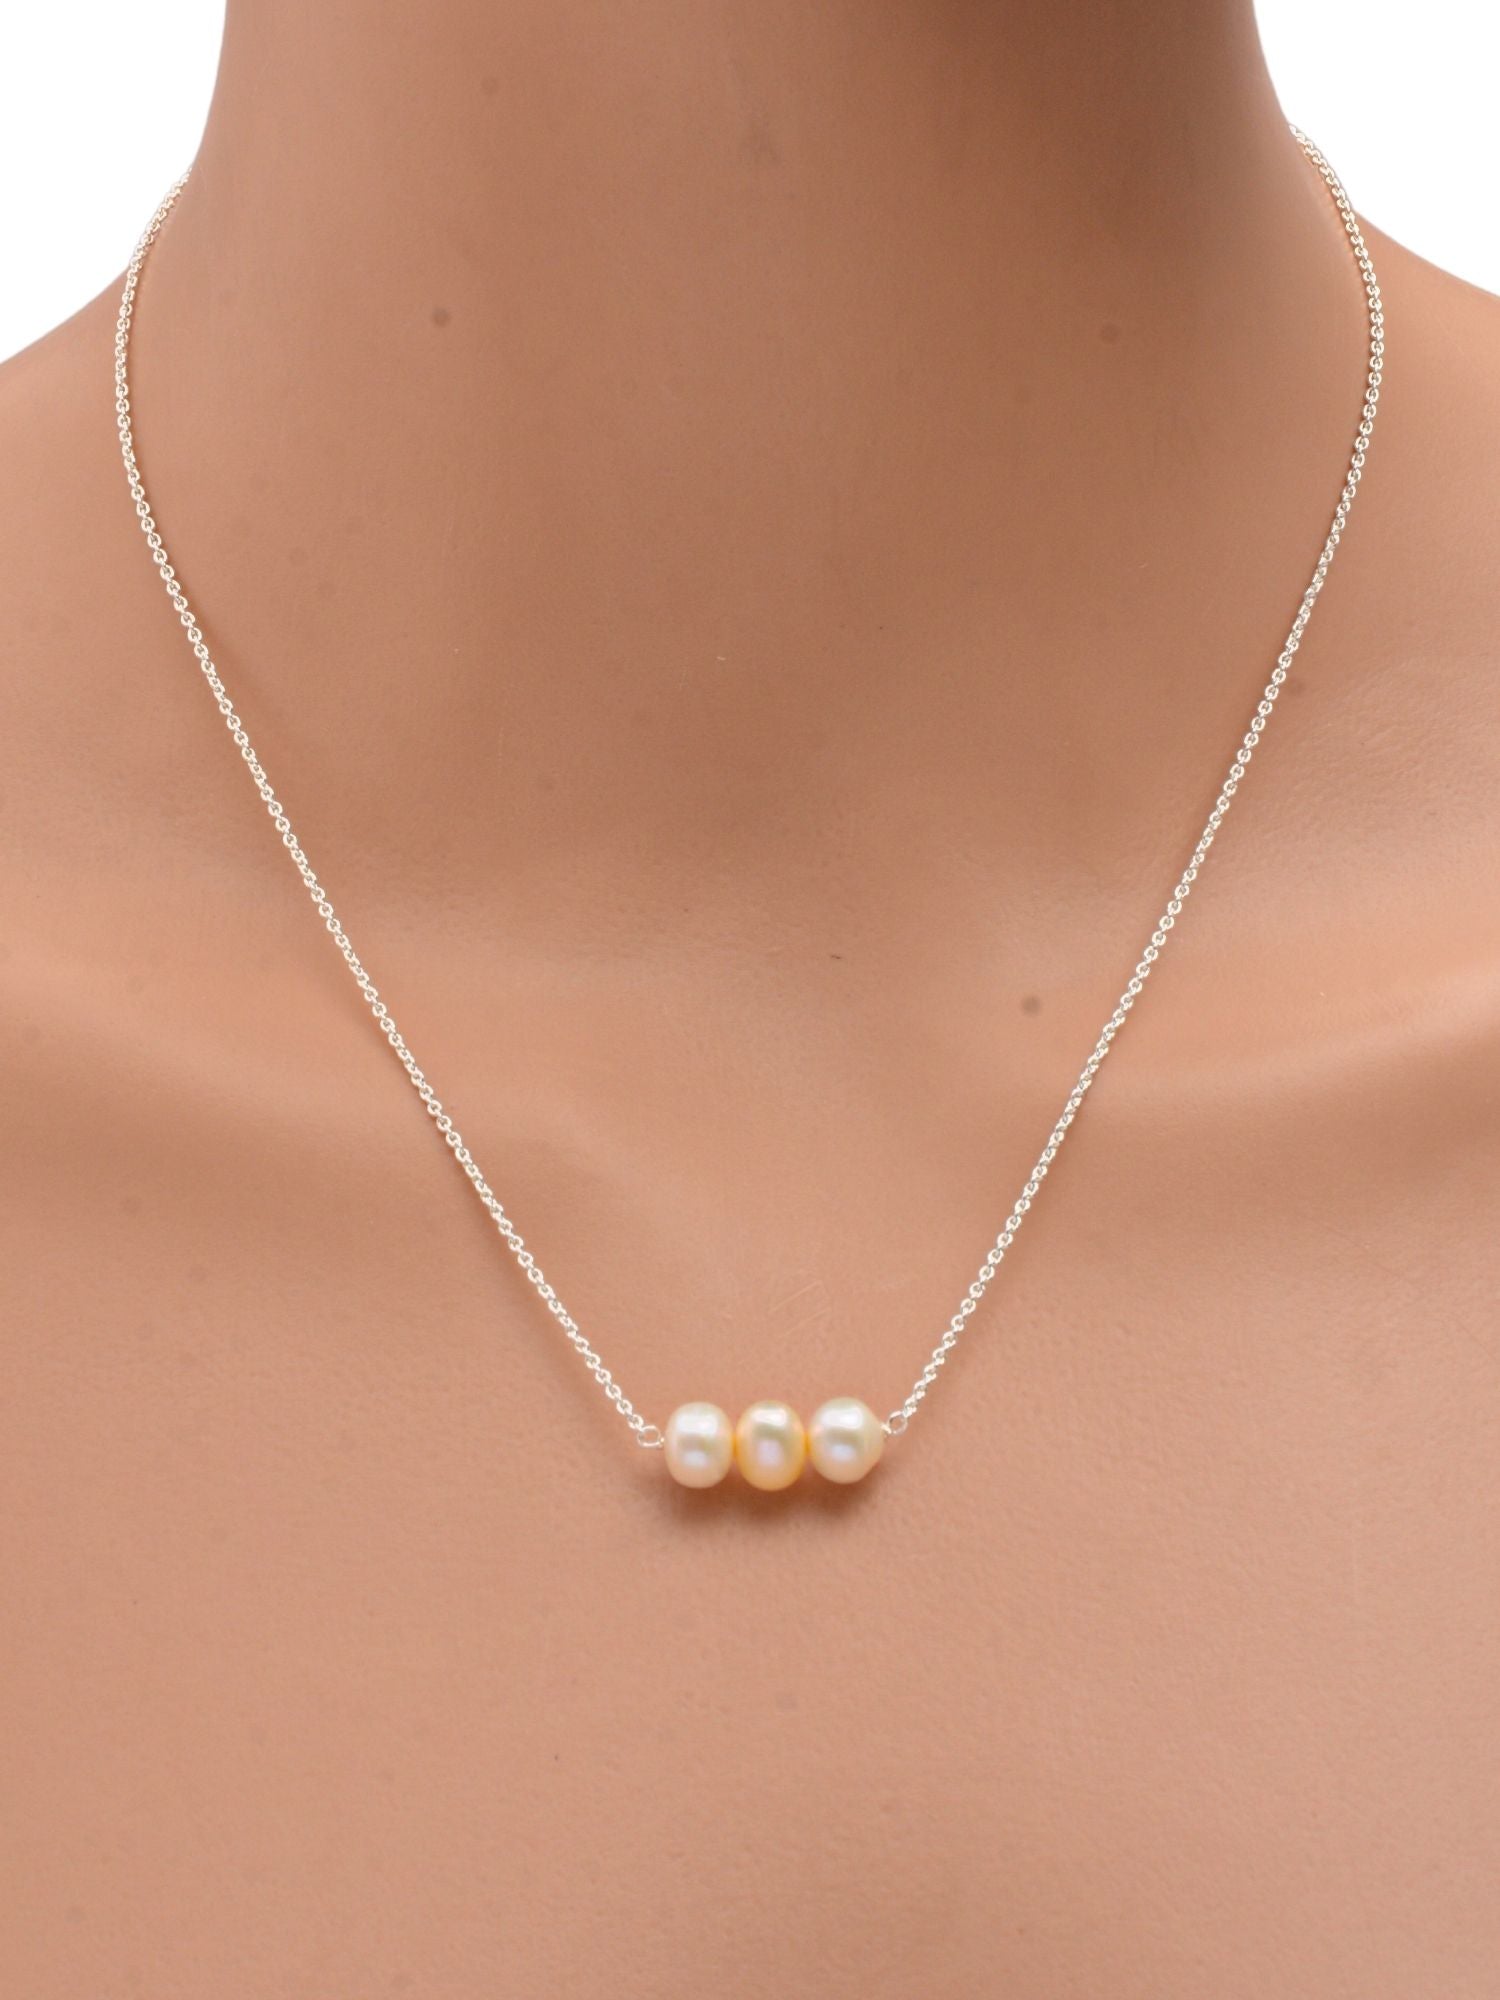 925 Sterling Silver Chain Necklace with High Luster Freshwater Pearls (925SL-FWP3)